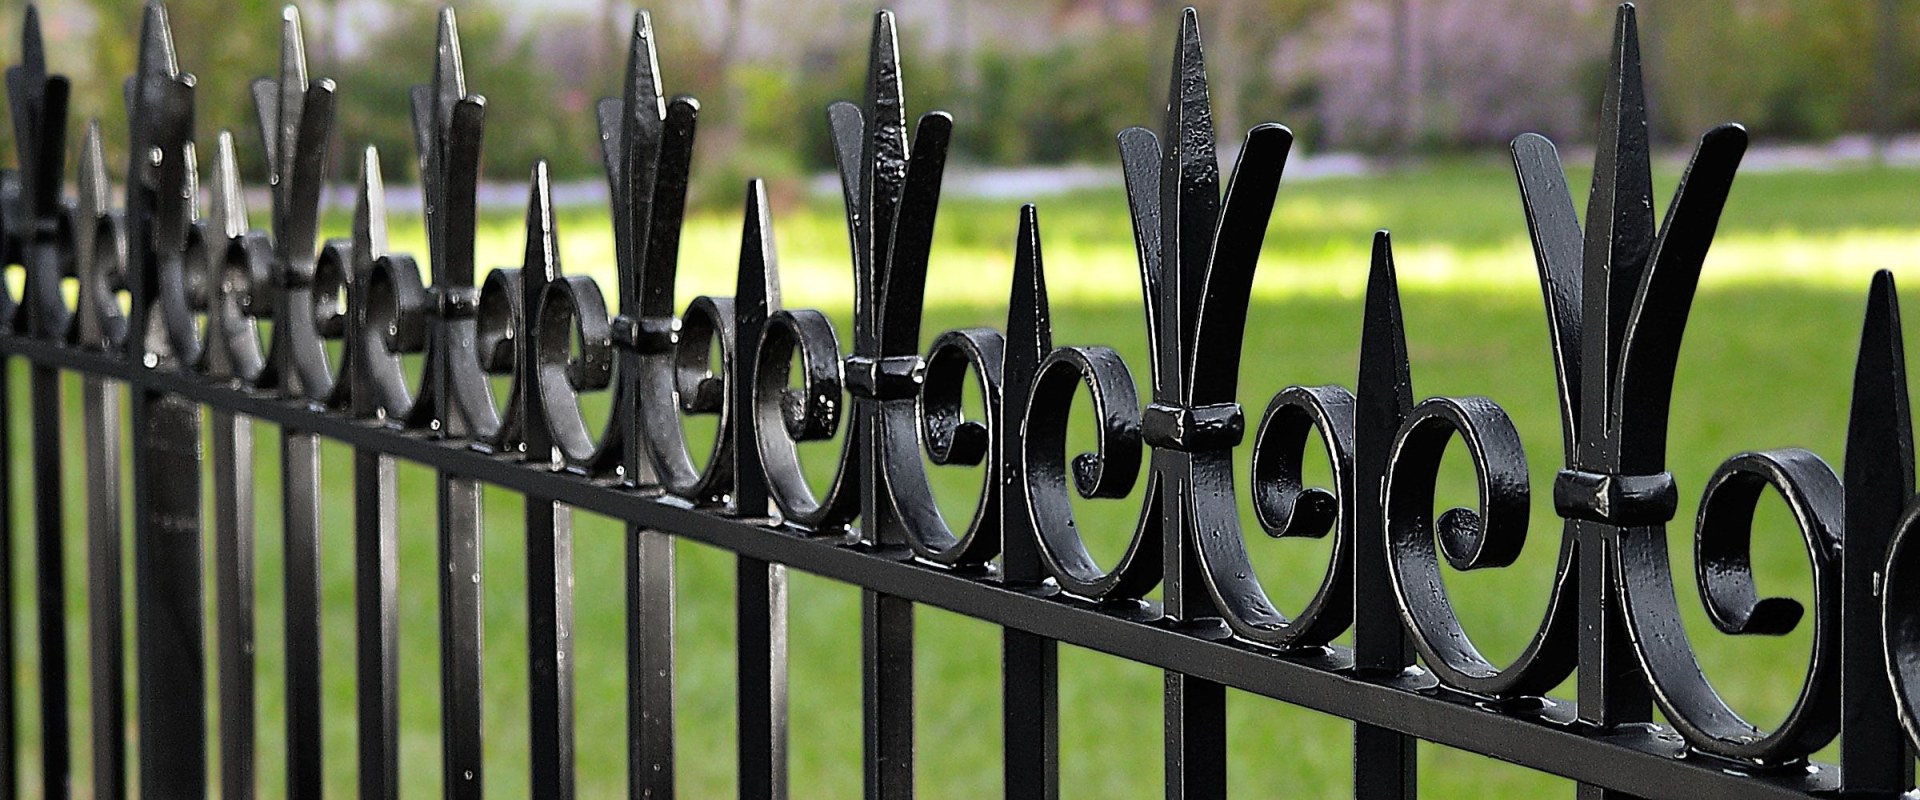 Wrought Iron Fencing Materials: An Informative Overview